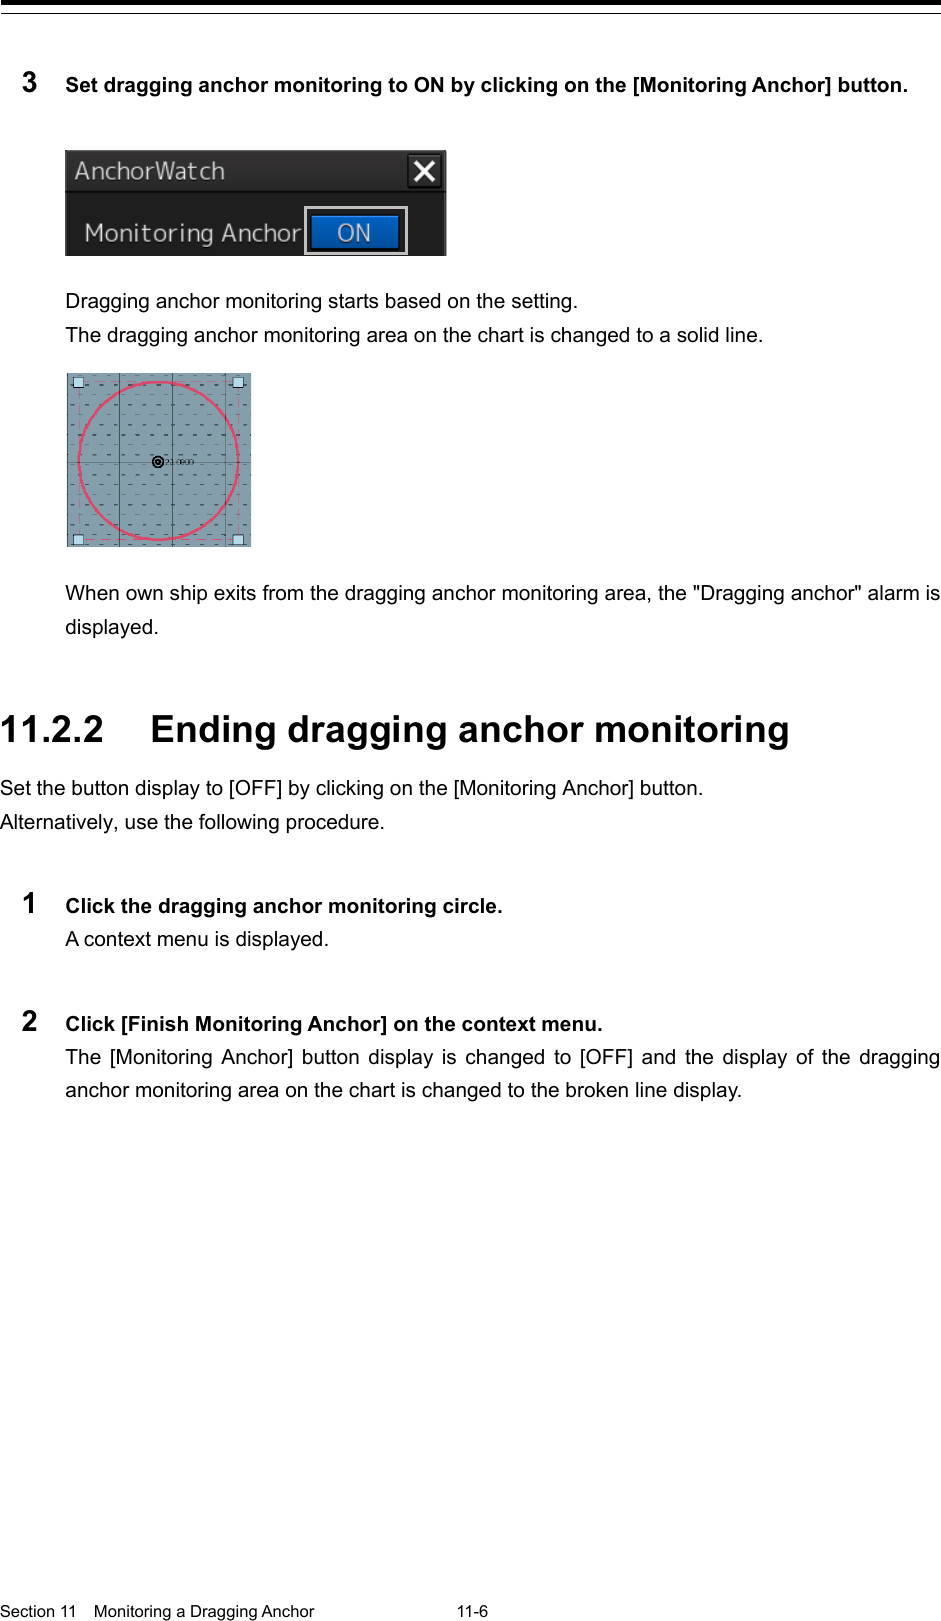  Section 11  Monitoring a Dragging Anchor  11-6  3  Set dragging anchor monitoring to ON by clicking on the [Monitoring Anchor] button.   Dragging anchor monitoring starts based on the setting. The dragging anchor monitoring area on the chart is changed to a solid line.  When own ship exits from the dragging anchor monitoring area, the &quot;Dragging anchor&quot; alarm is displayed.   11.2.2 Ending dragging anchor monitoring Set the button display to [OFF] by clicking on the [Monitoring Anchor] button. Alternatively, use the following procedure.  1  Click the dragging anchor monitoring circle. A context menu is displayed.  2  Click [Finish Monitoring Anchor] on the context menu. The  [Monitoring Anchor]  button display is changed to [OFF] and the display of the dragging anchor monitoring area on the chart is changed to the broken line display.    